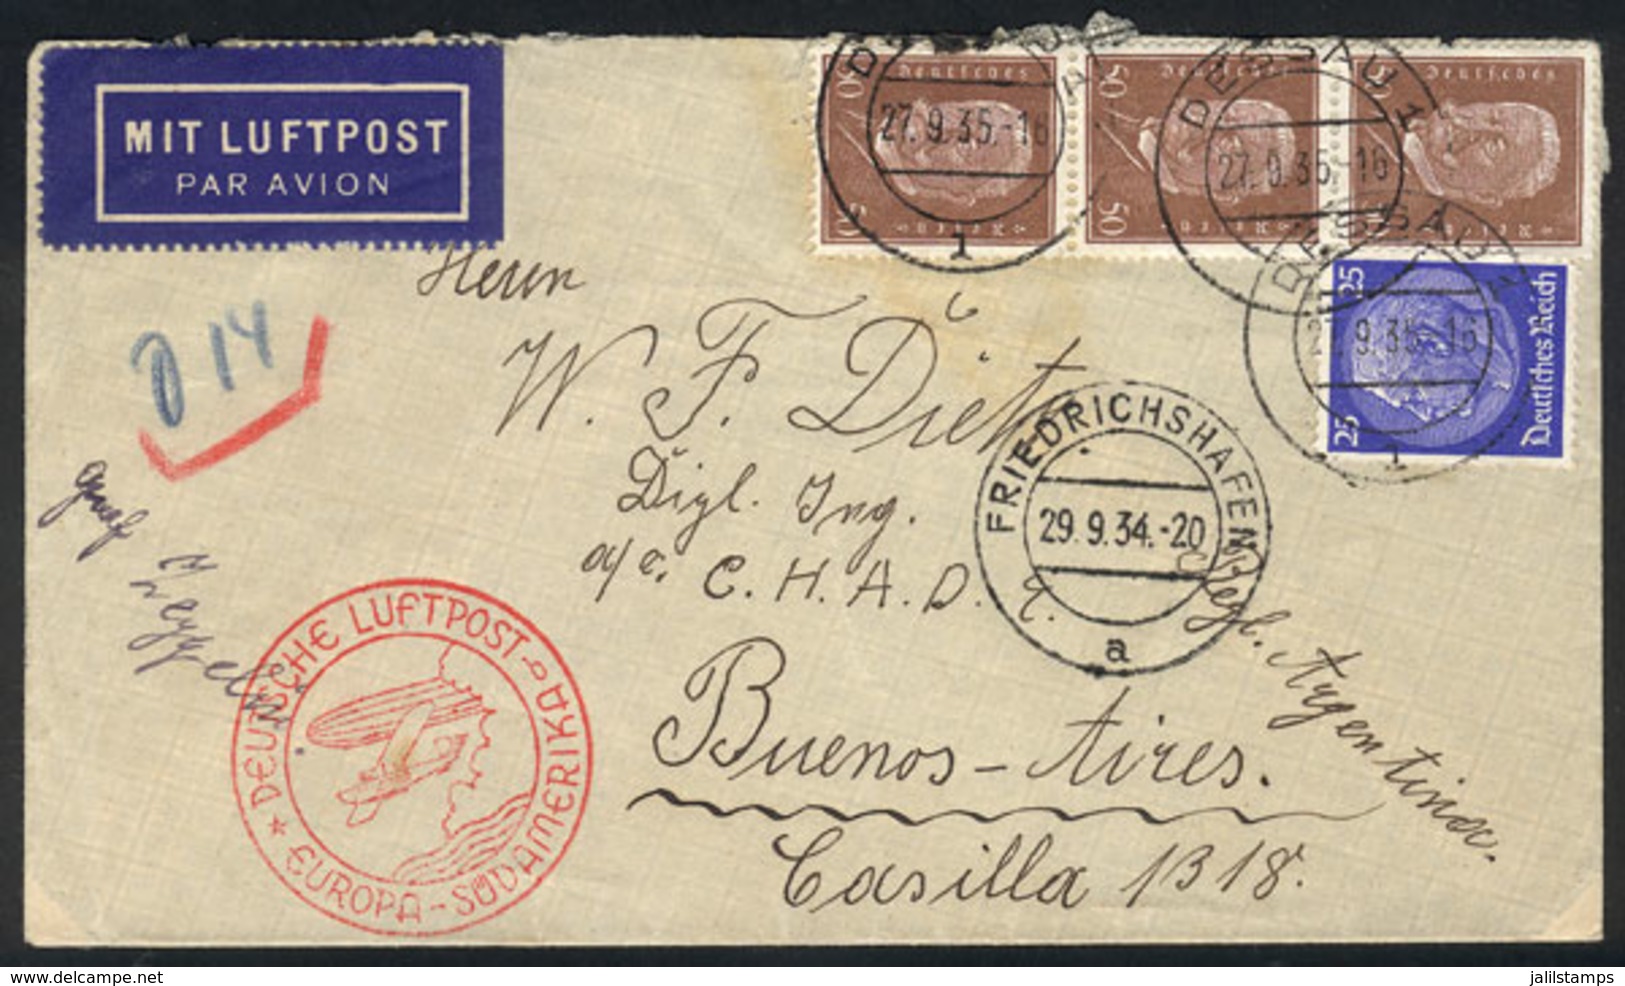 GERMANY: Airmail Cover Flown By ZEPPELIN, Sent From Dessau To Buenos Aires On 27/SE/1935, VF Quality! - Precursores